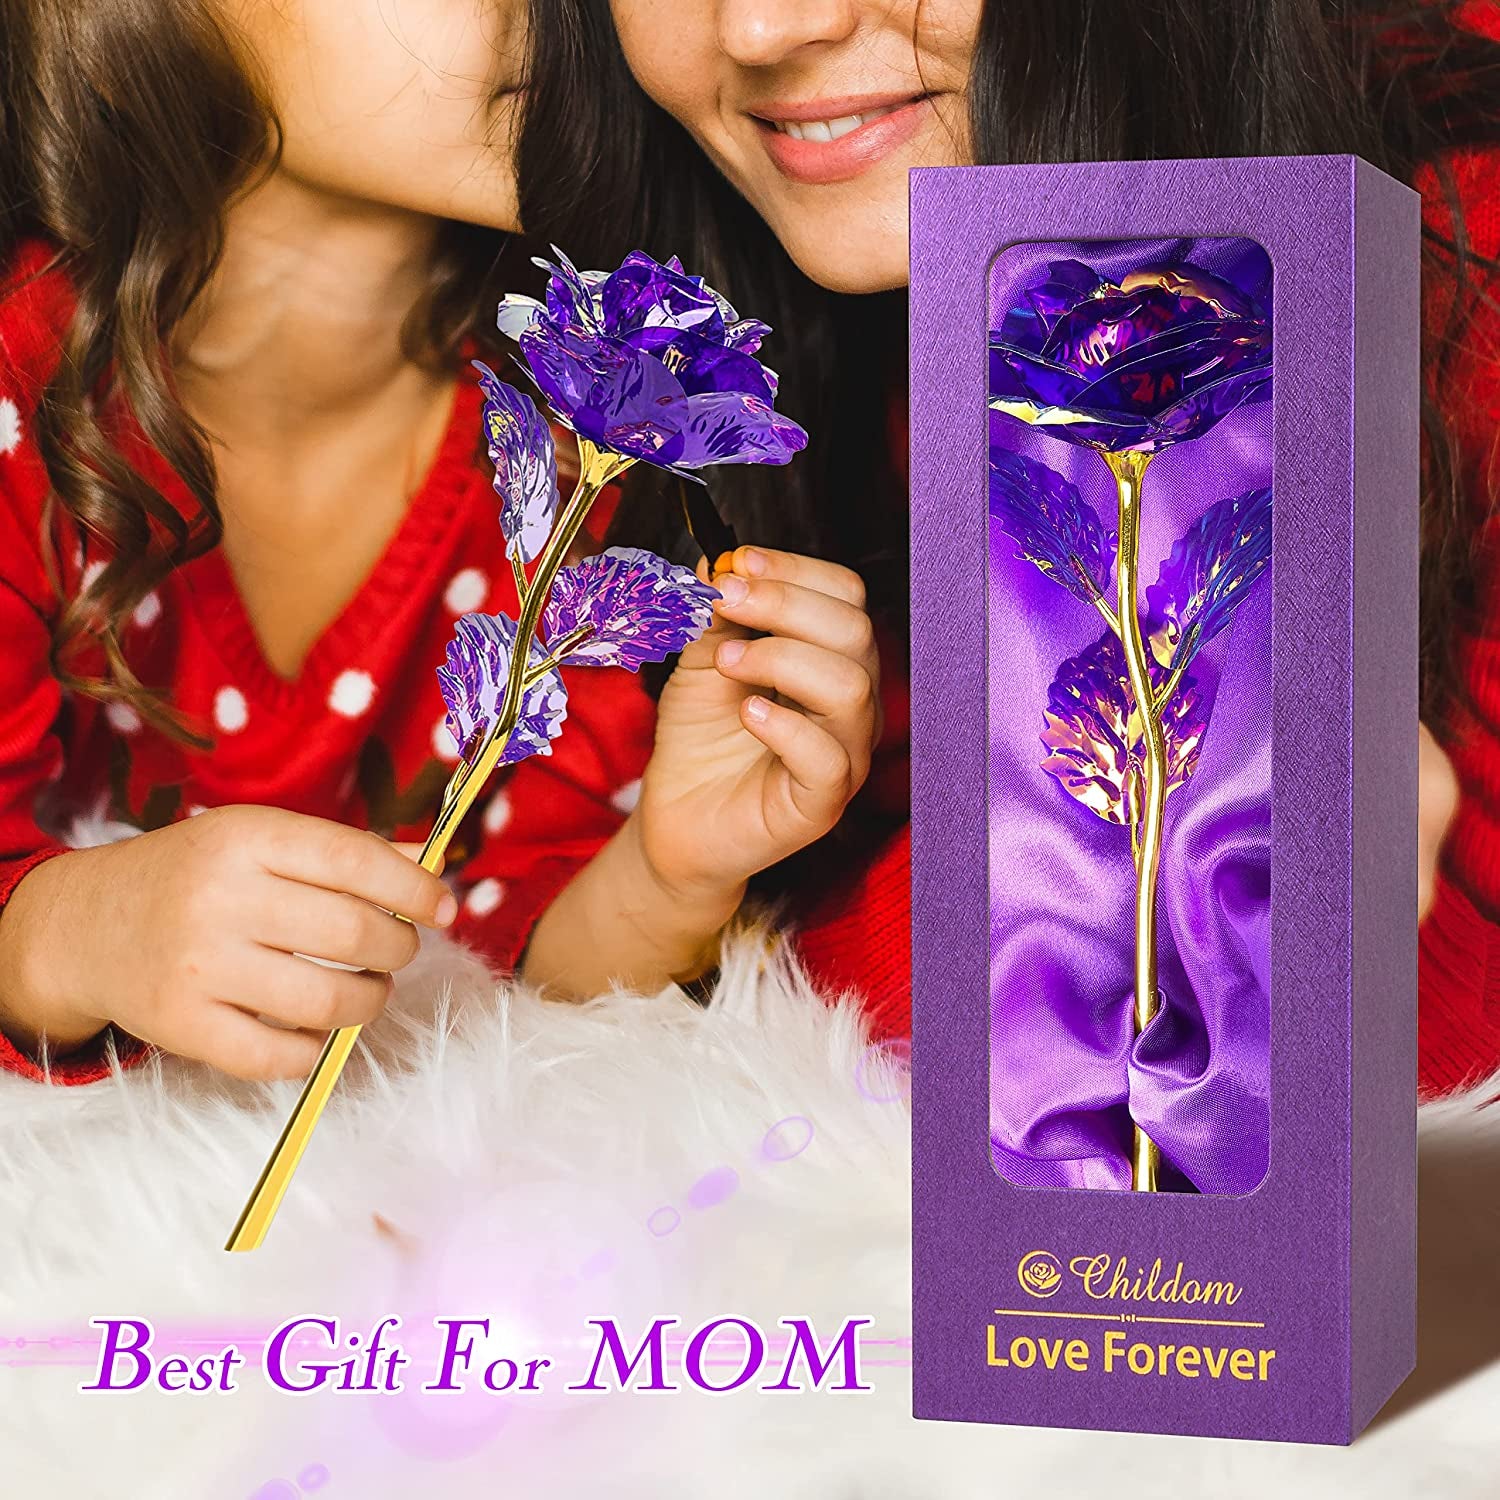 Valentines Day Gifts for Women,Mom Birthday Gifts for Her,Rose Flower Gifts for Mom,Purple Valentines Rose Flower Gifts for Mom from Daughter Son, Valentines Gifts for Wife, Girl, Grandma,Anniversary